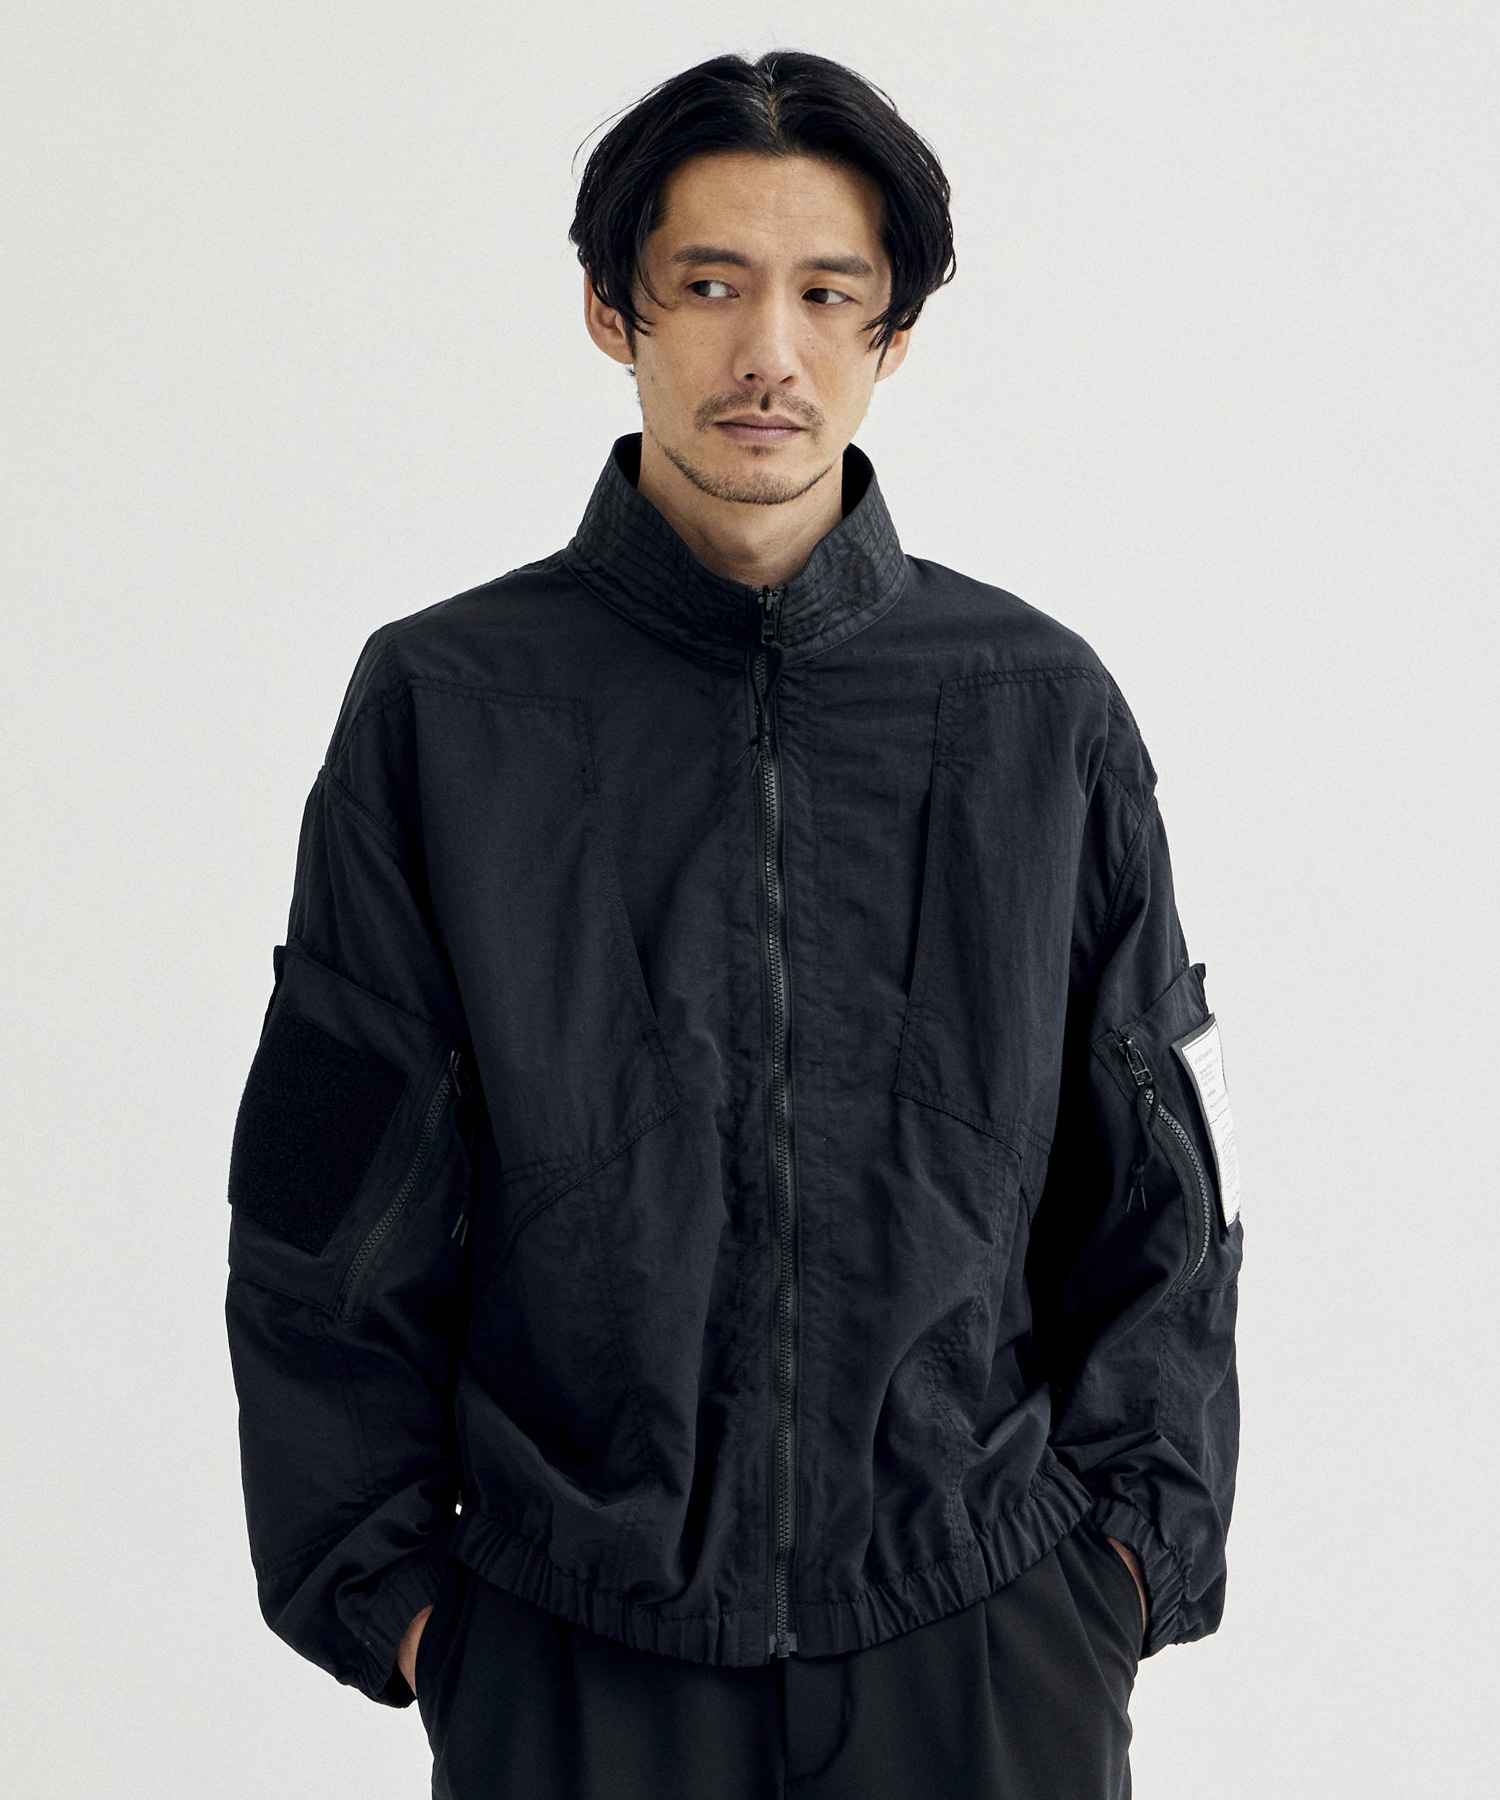 NEW ARRIVAL: MENS(並び順：新着順)｜THE TOKYO ONLINE STORE